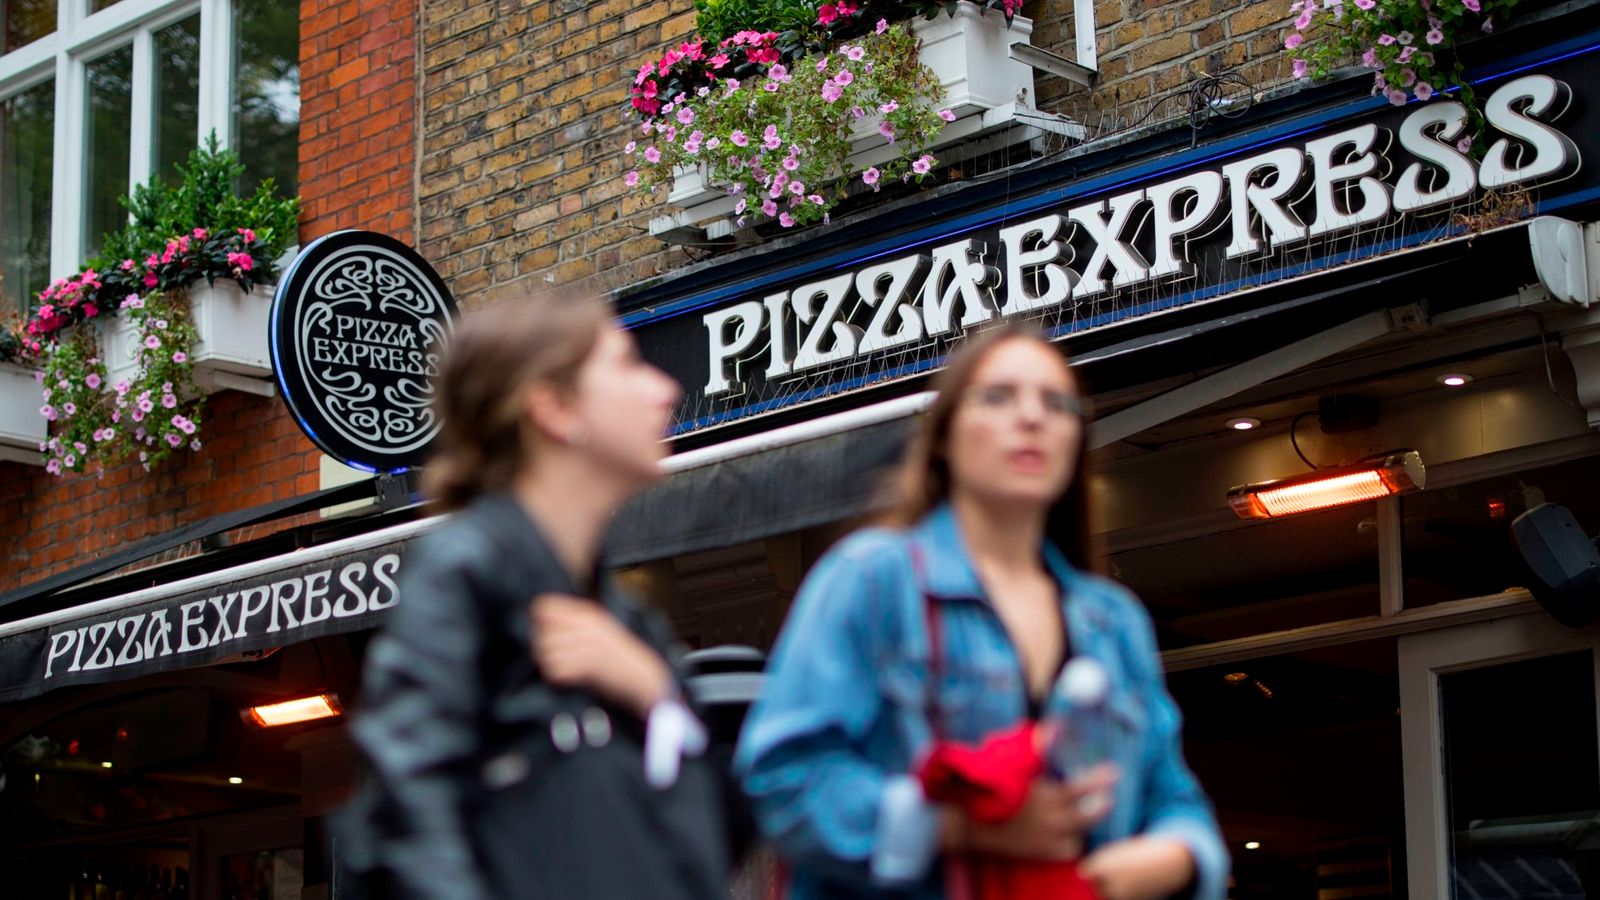 Coronavirus: Pizza Express slimming plans that put 1,100 jobs at risk are  approved | Business News | Sky News